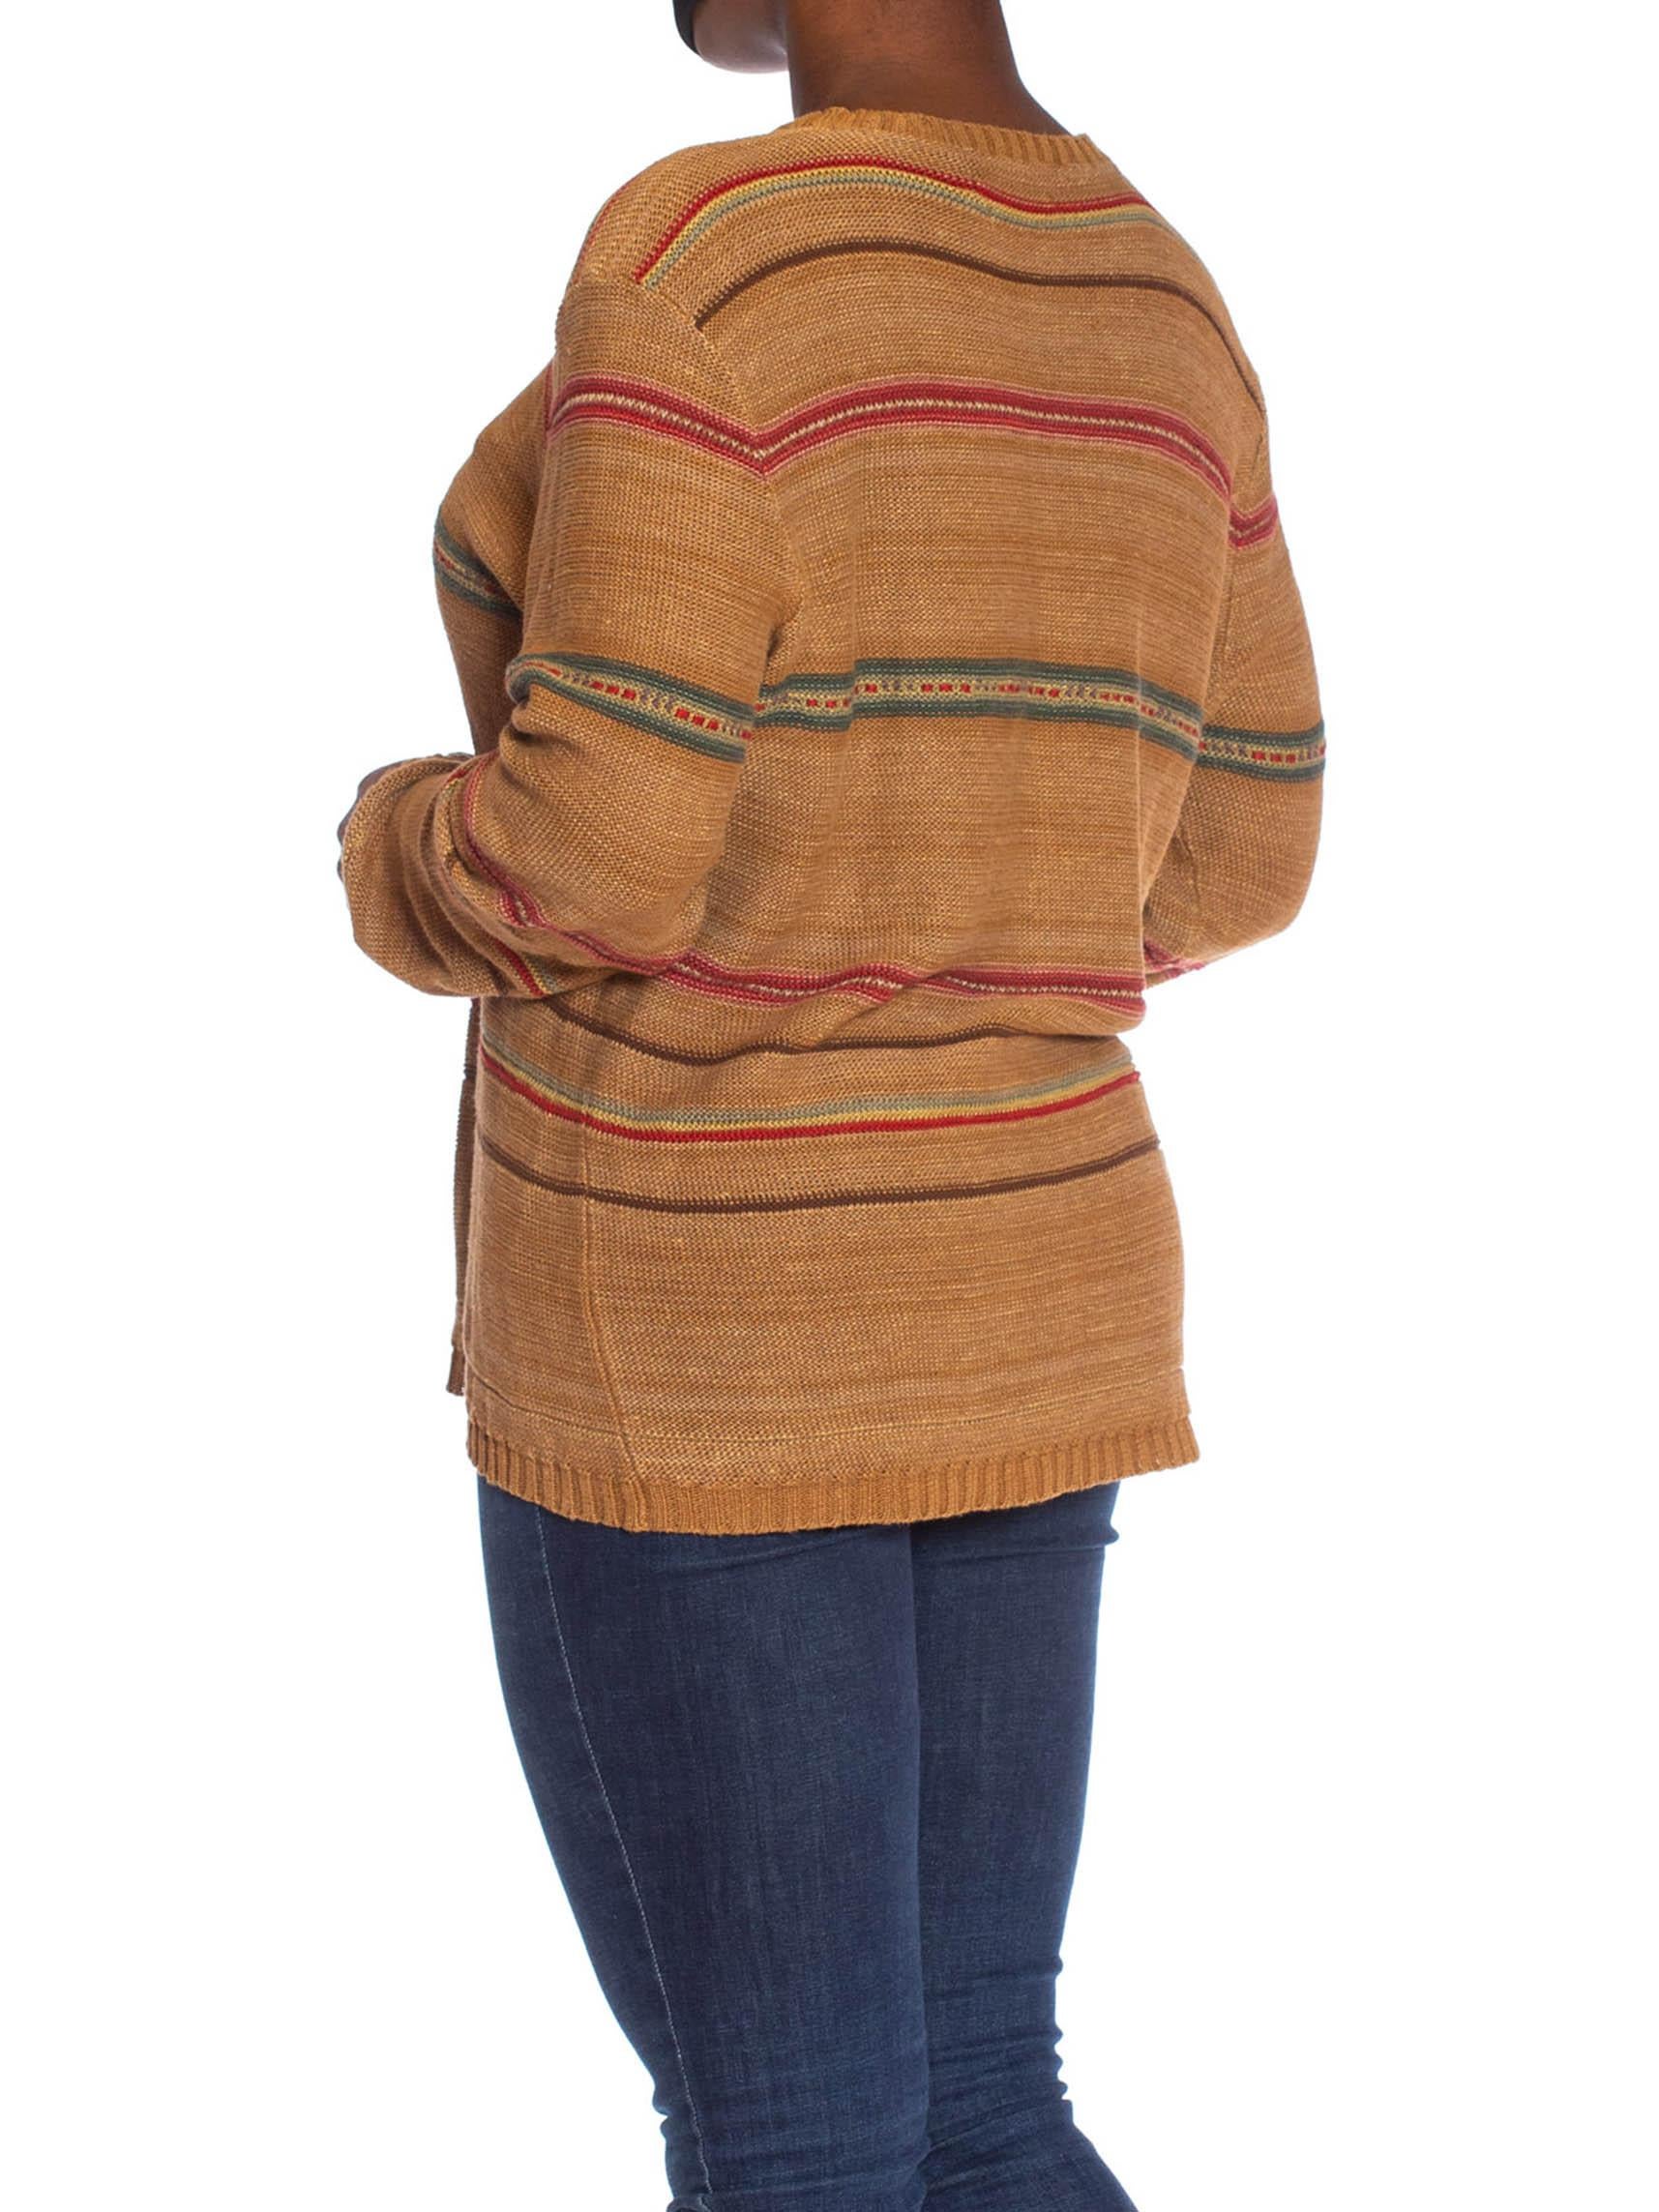 1990S POLO RALPH LAUREN Caramel Brown Linen Blend Knit Serape Stripe Sweater In Excellent Condition For Sale In New York, NY